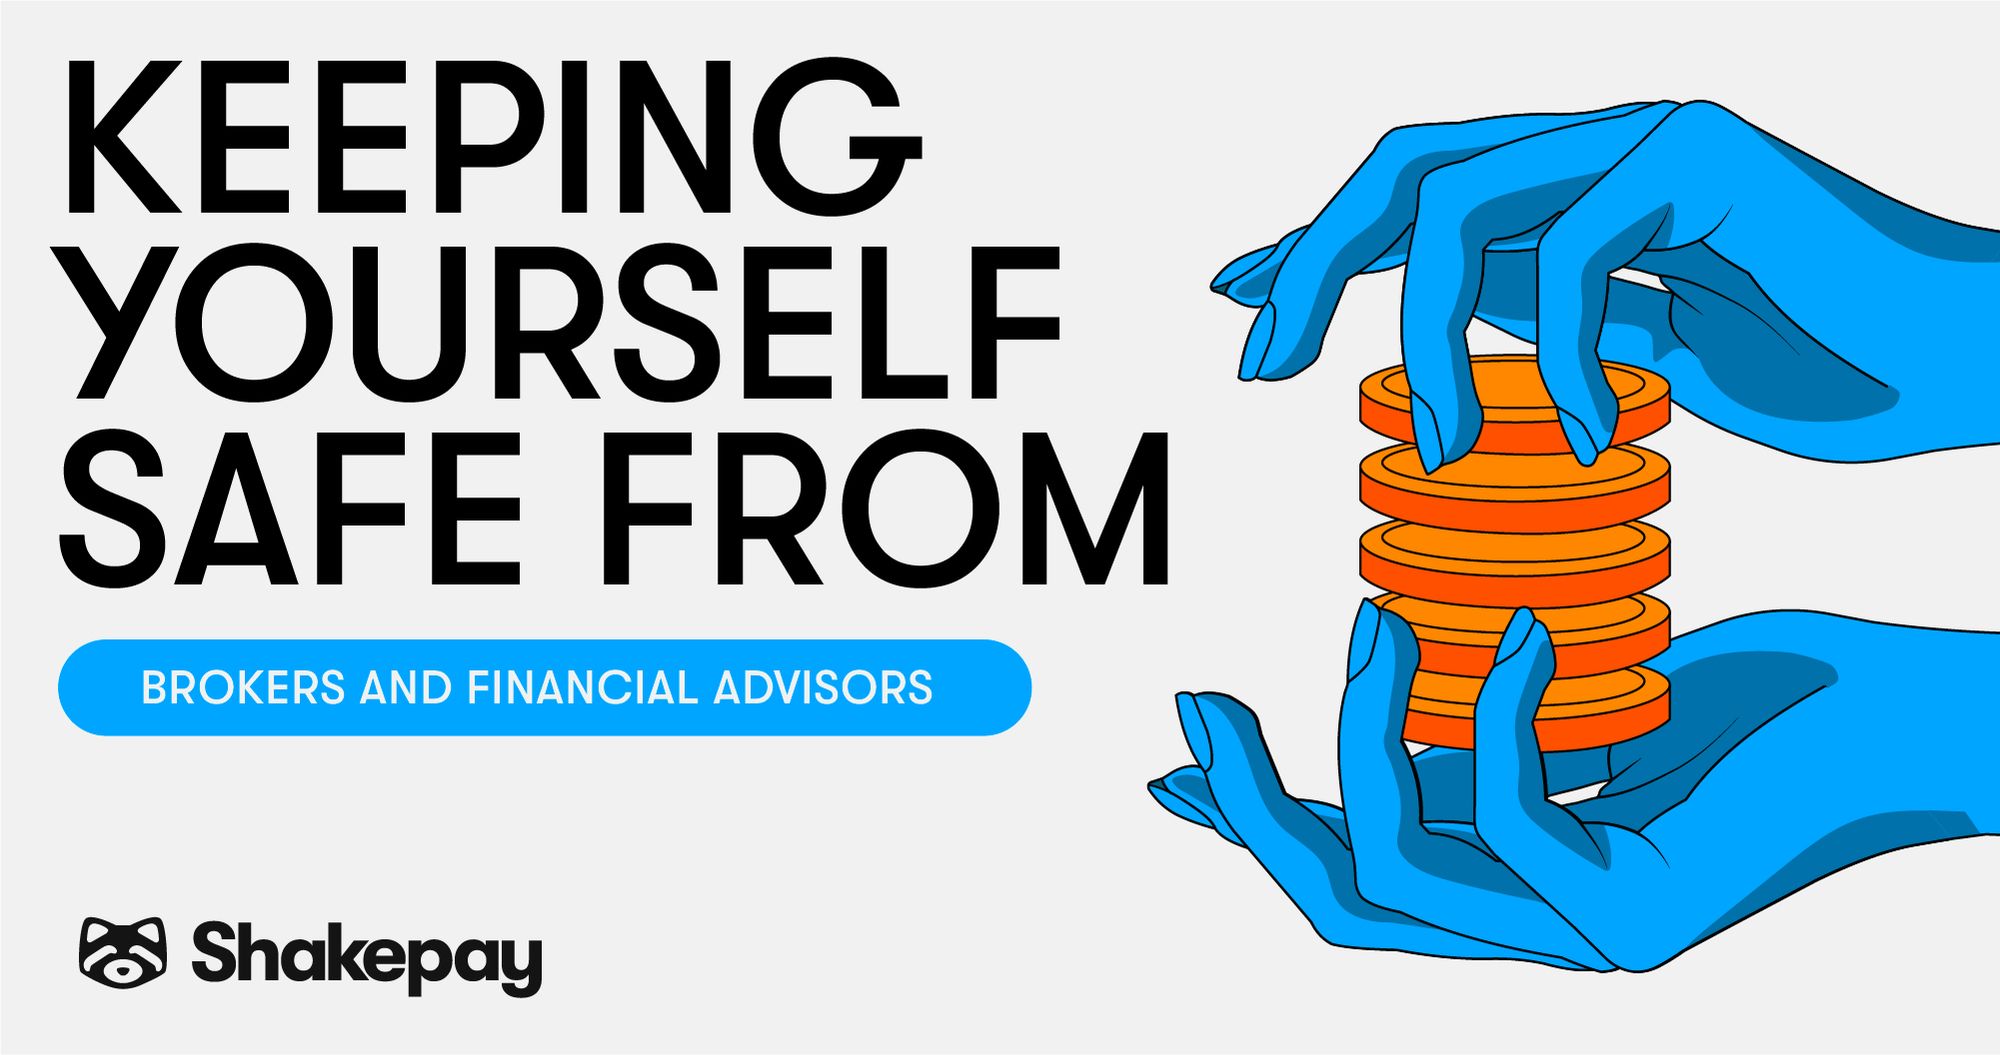 Keeping Yourself Safe: Brokers and Financial Advisors